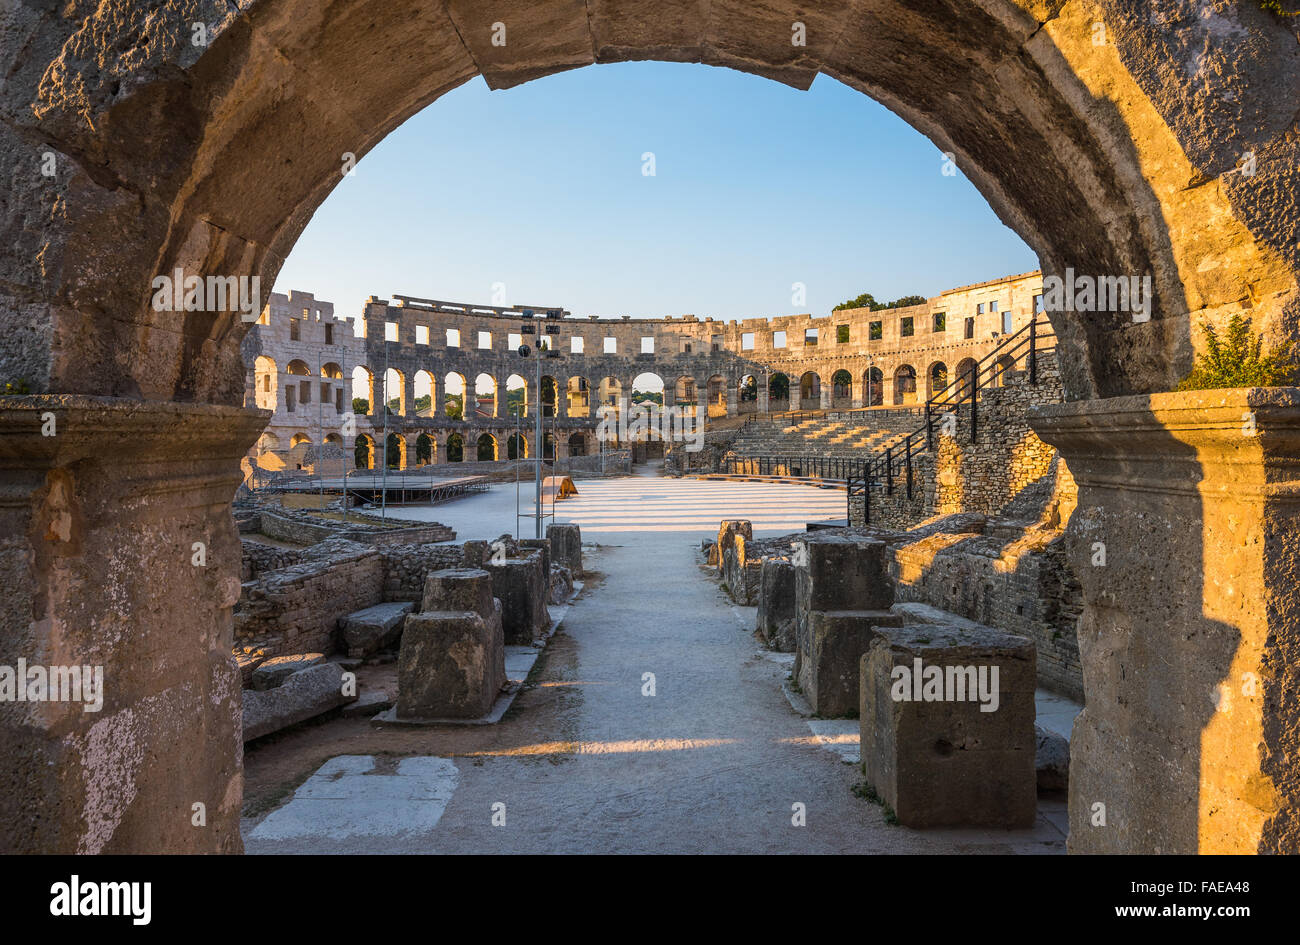 Architecture Details of the Roman Amphitheater Arena Seen through Big Round Arch in Sunny Summer Evening. Famous Travel Destinat Stock Photo